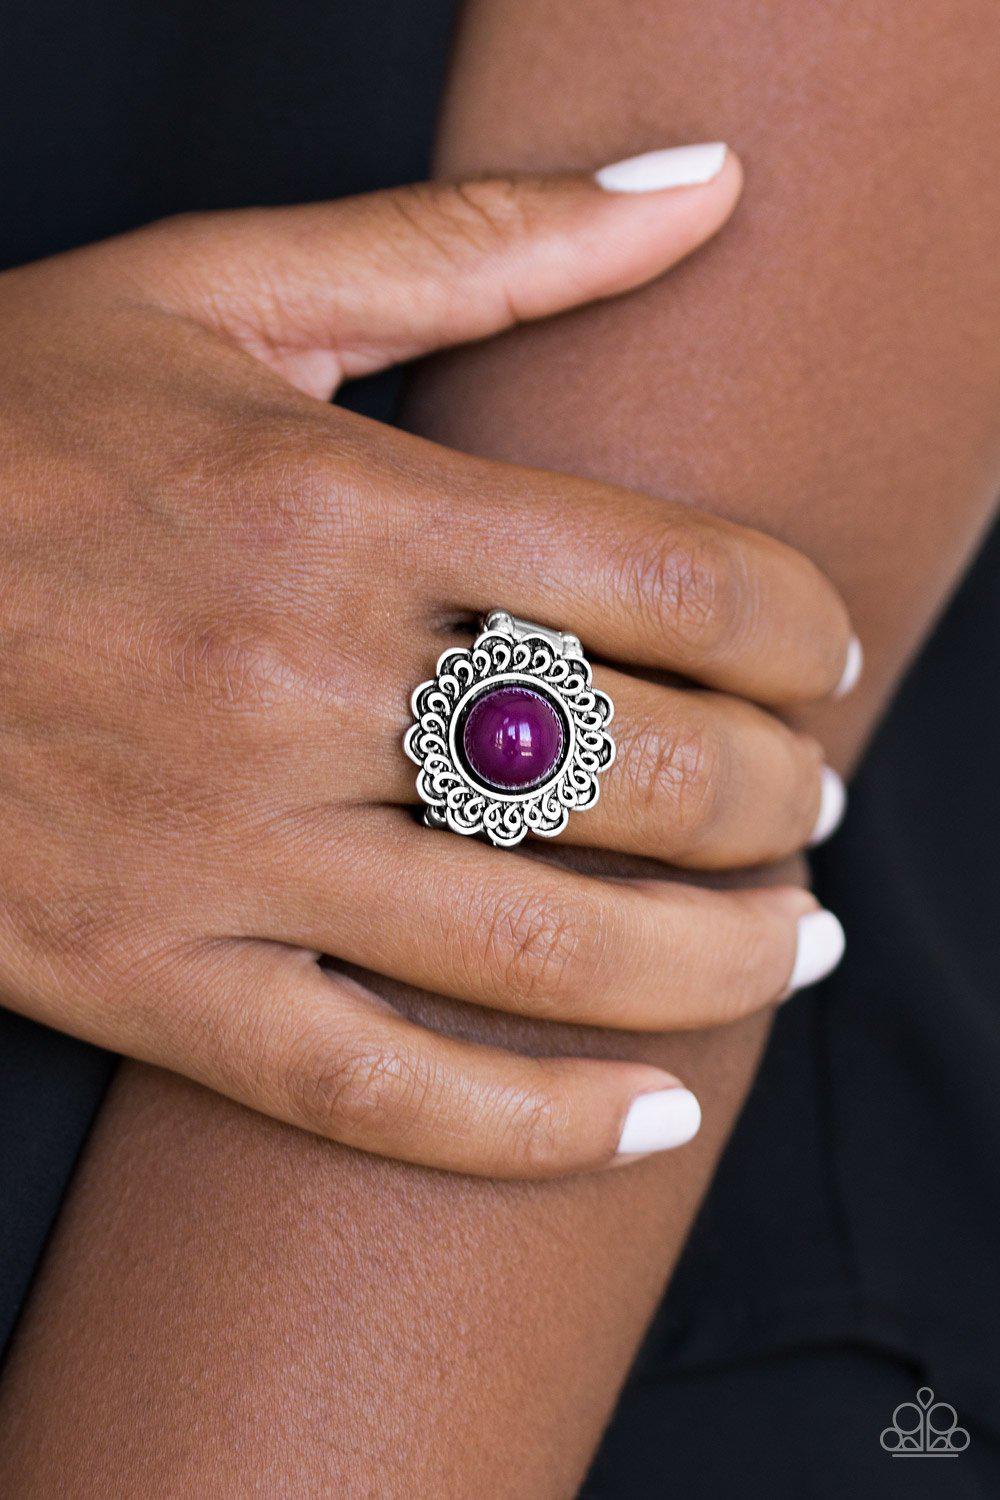 Garden Stroll Silver and Purple Ring - Paparazzi Accessories-CarasShop.com - $5 Jewelry by Cara Jewels